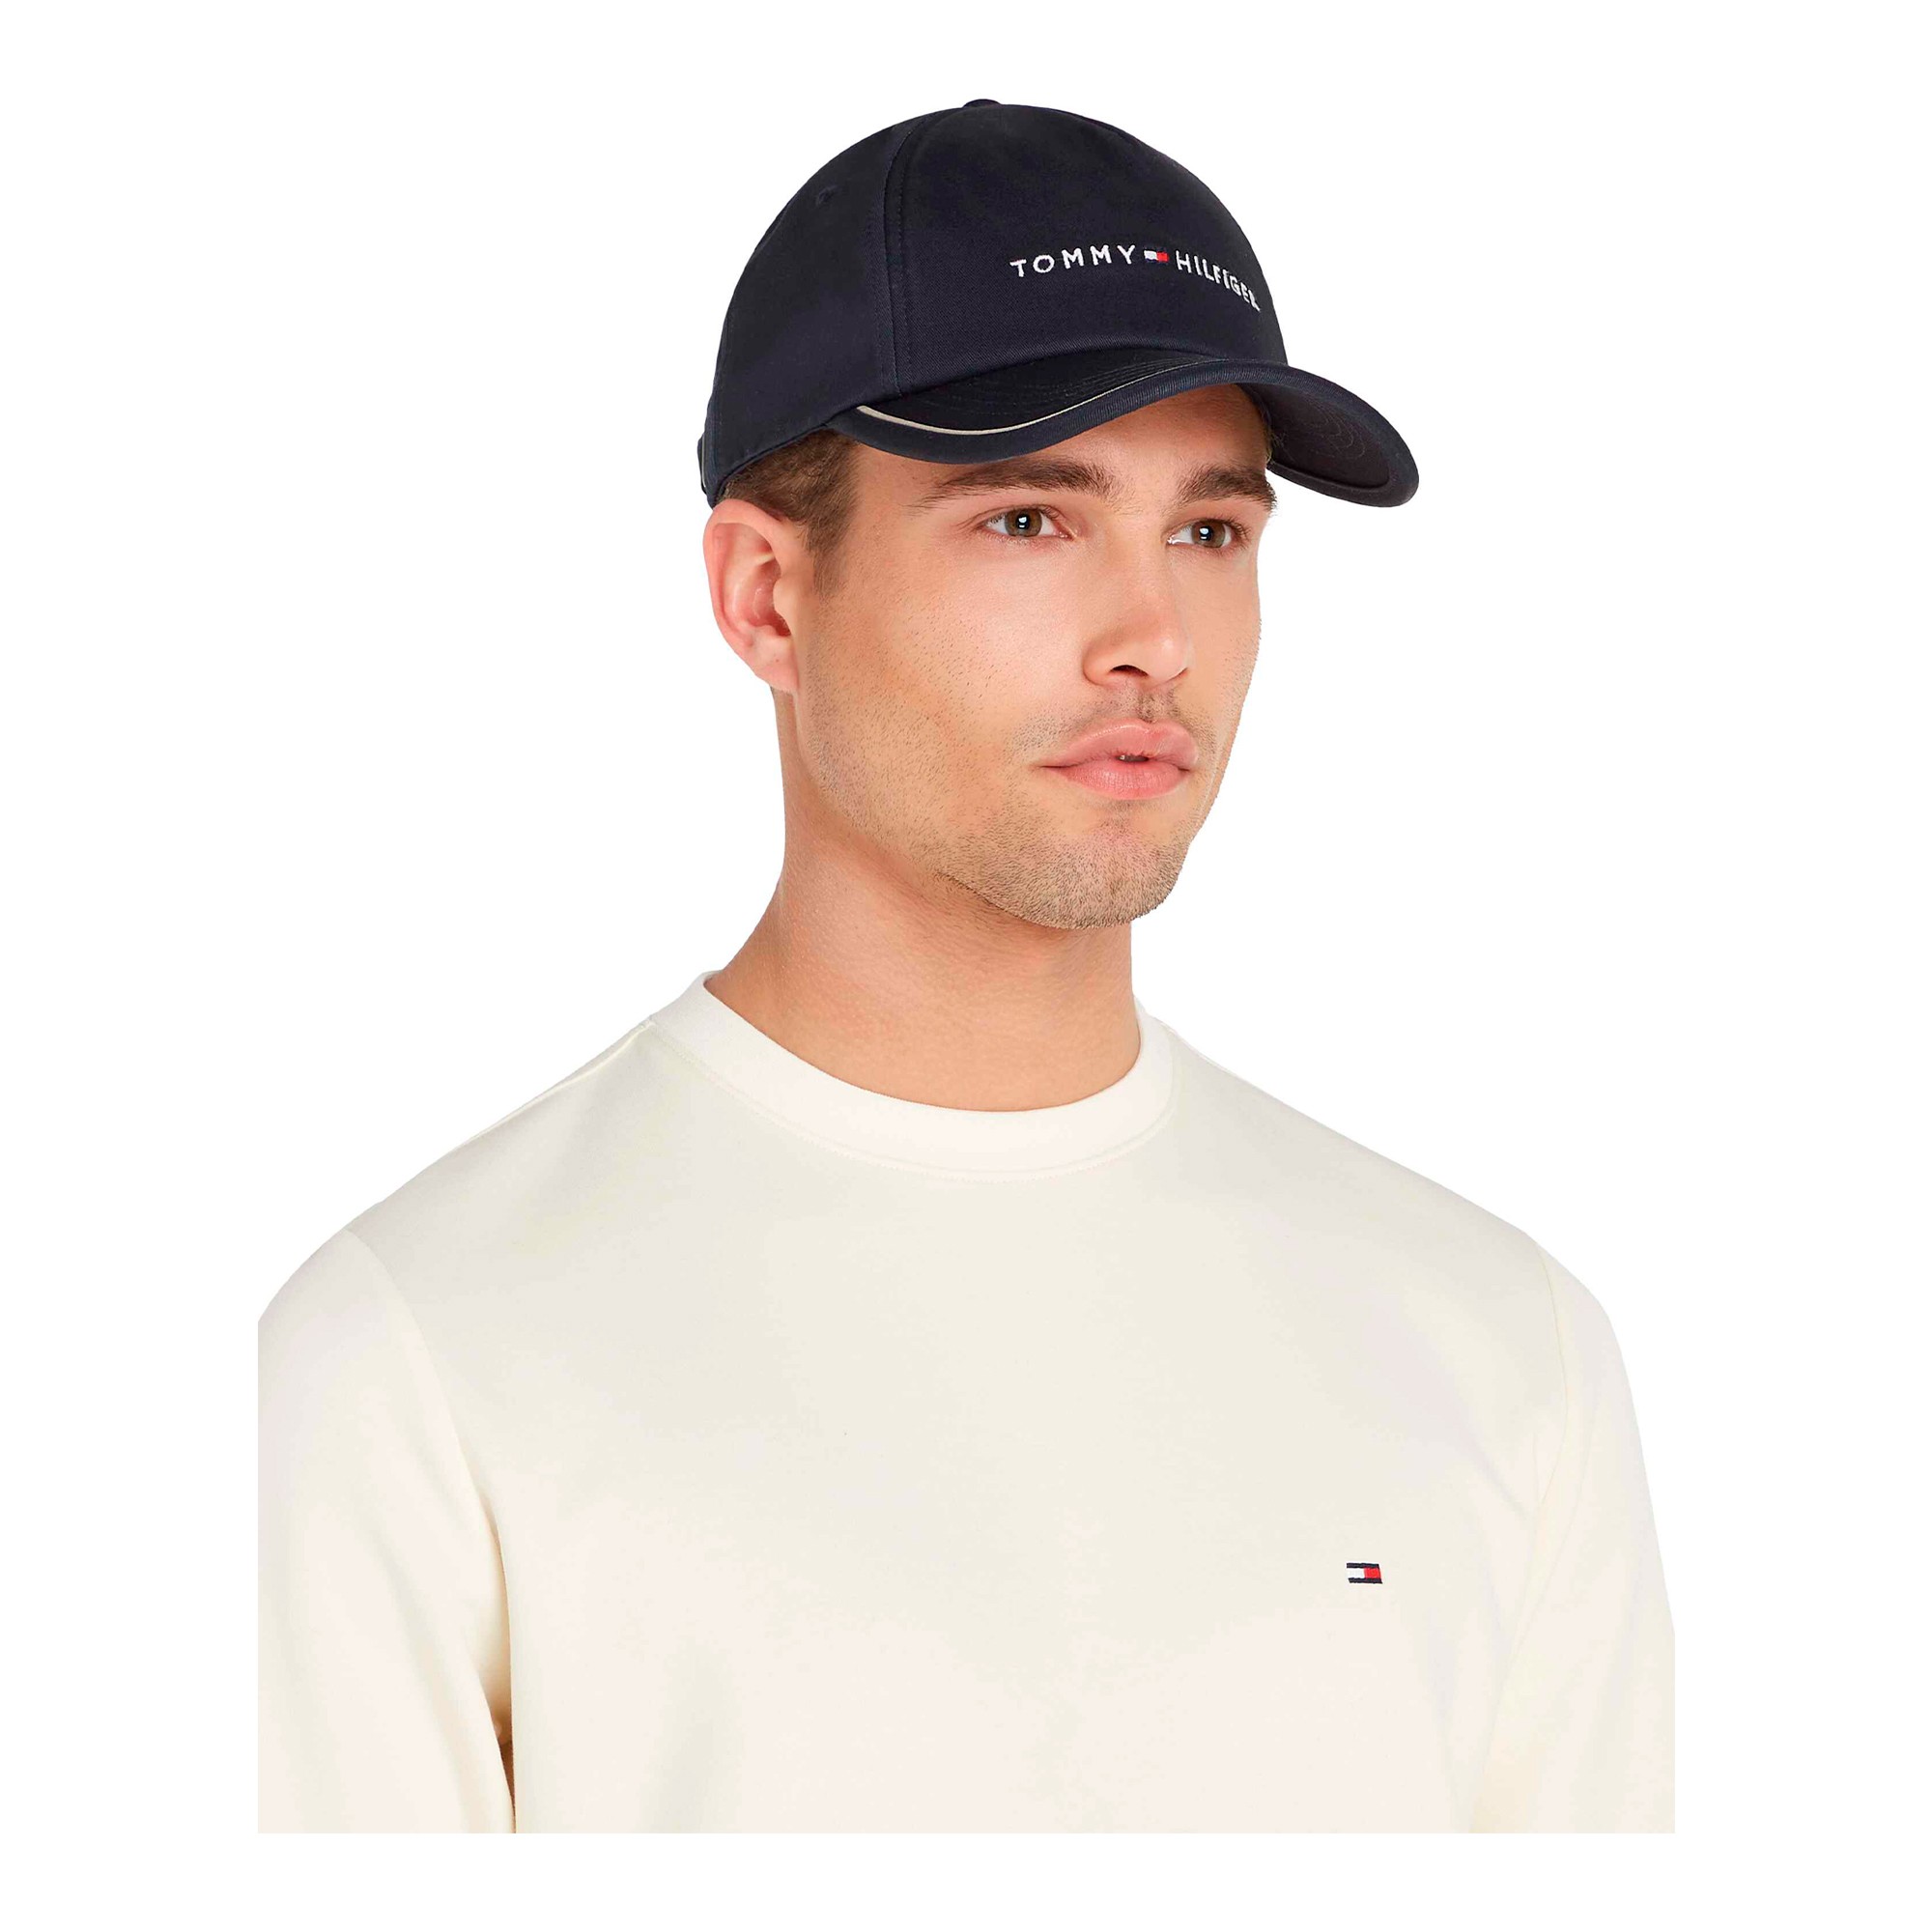 TOMMY HILFIGER Caps and visors AM0AM12039 DW6 SPACE BLUE